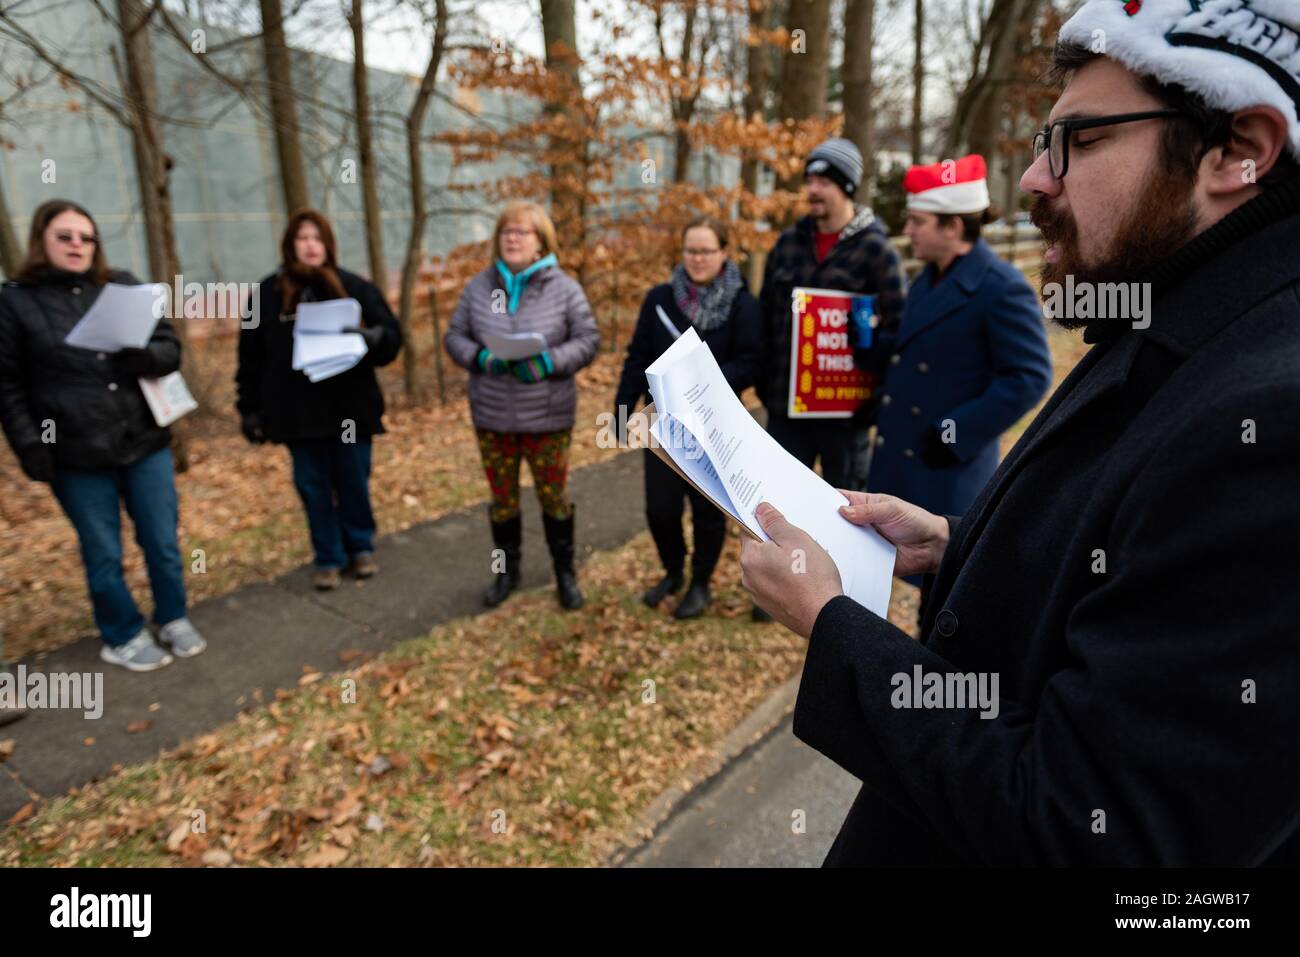 Exton, USA. 21st Dec, 2019. Exton Pennsylvania / USA. About twenty people gathered in suburban Exton Pennsylvania singing Christmas carols with altered lyrics to protest the arrest of two pipeline activists, Mark and Malinda Clatterbuck. Local residents used the Christmas-themed rally to push back on ongoing intimidation by pipeline company Sunoco. Credit: Chris Baker Evens / Alamy Live News. Credit: Christopher Evens/Alamy Live News Stock Photo